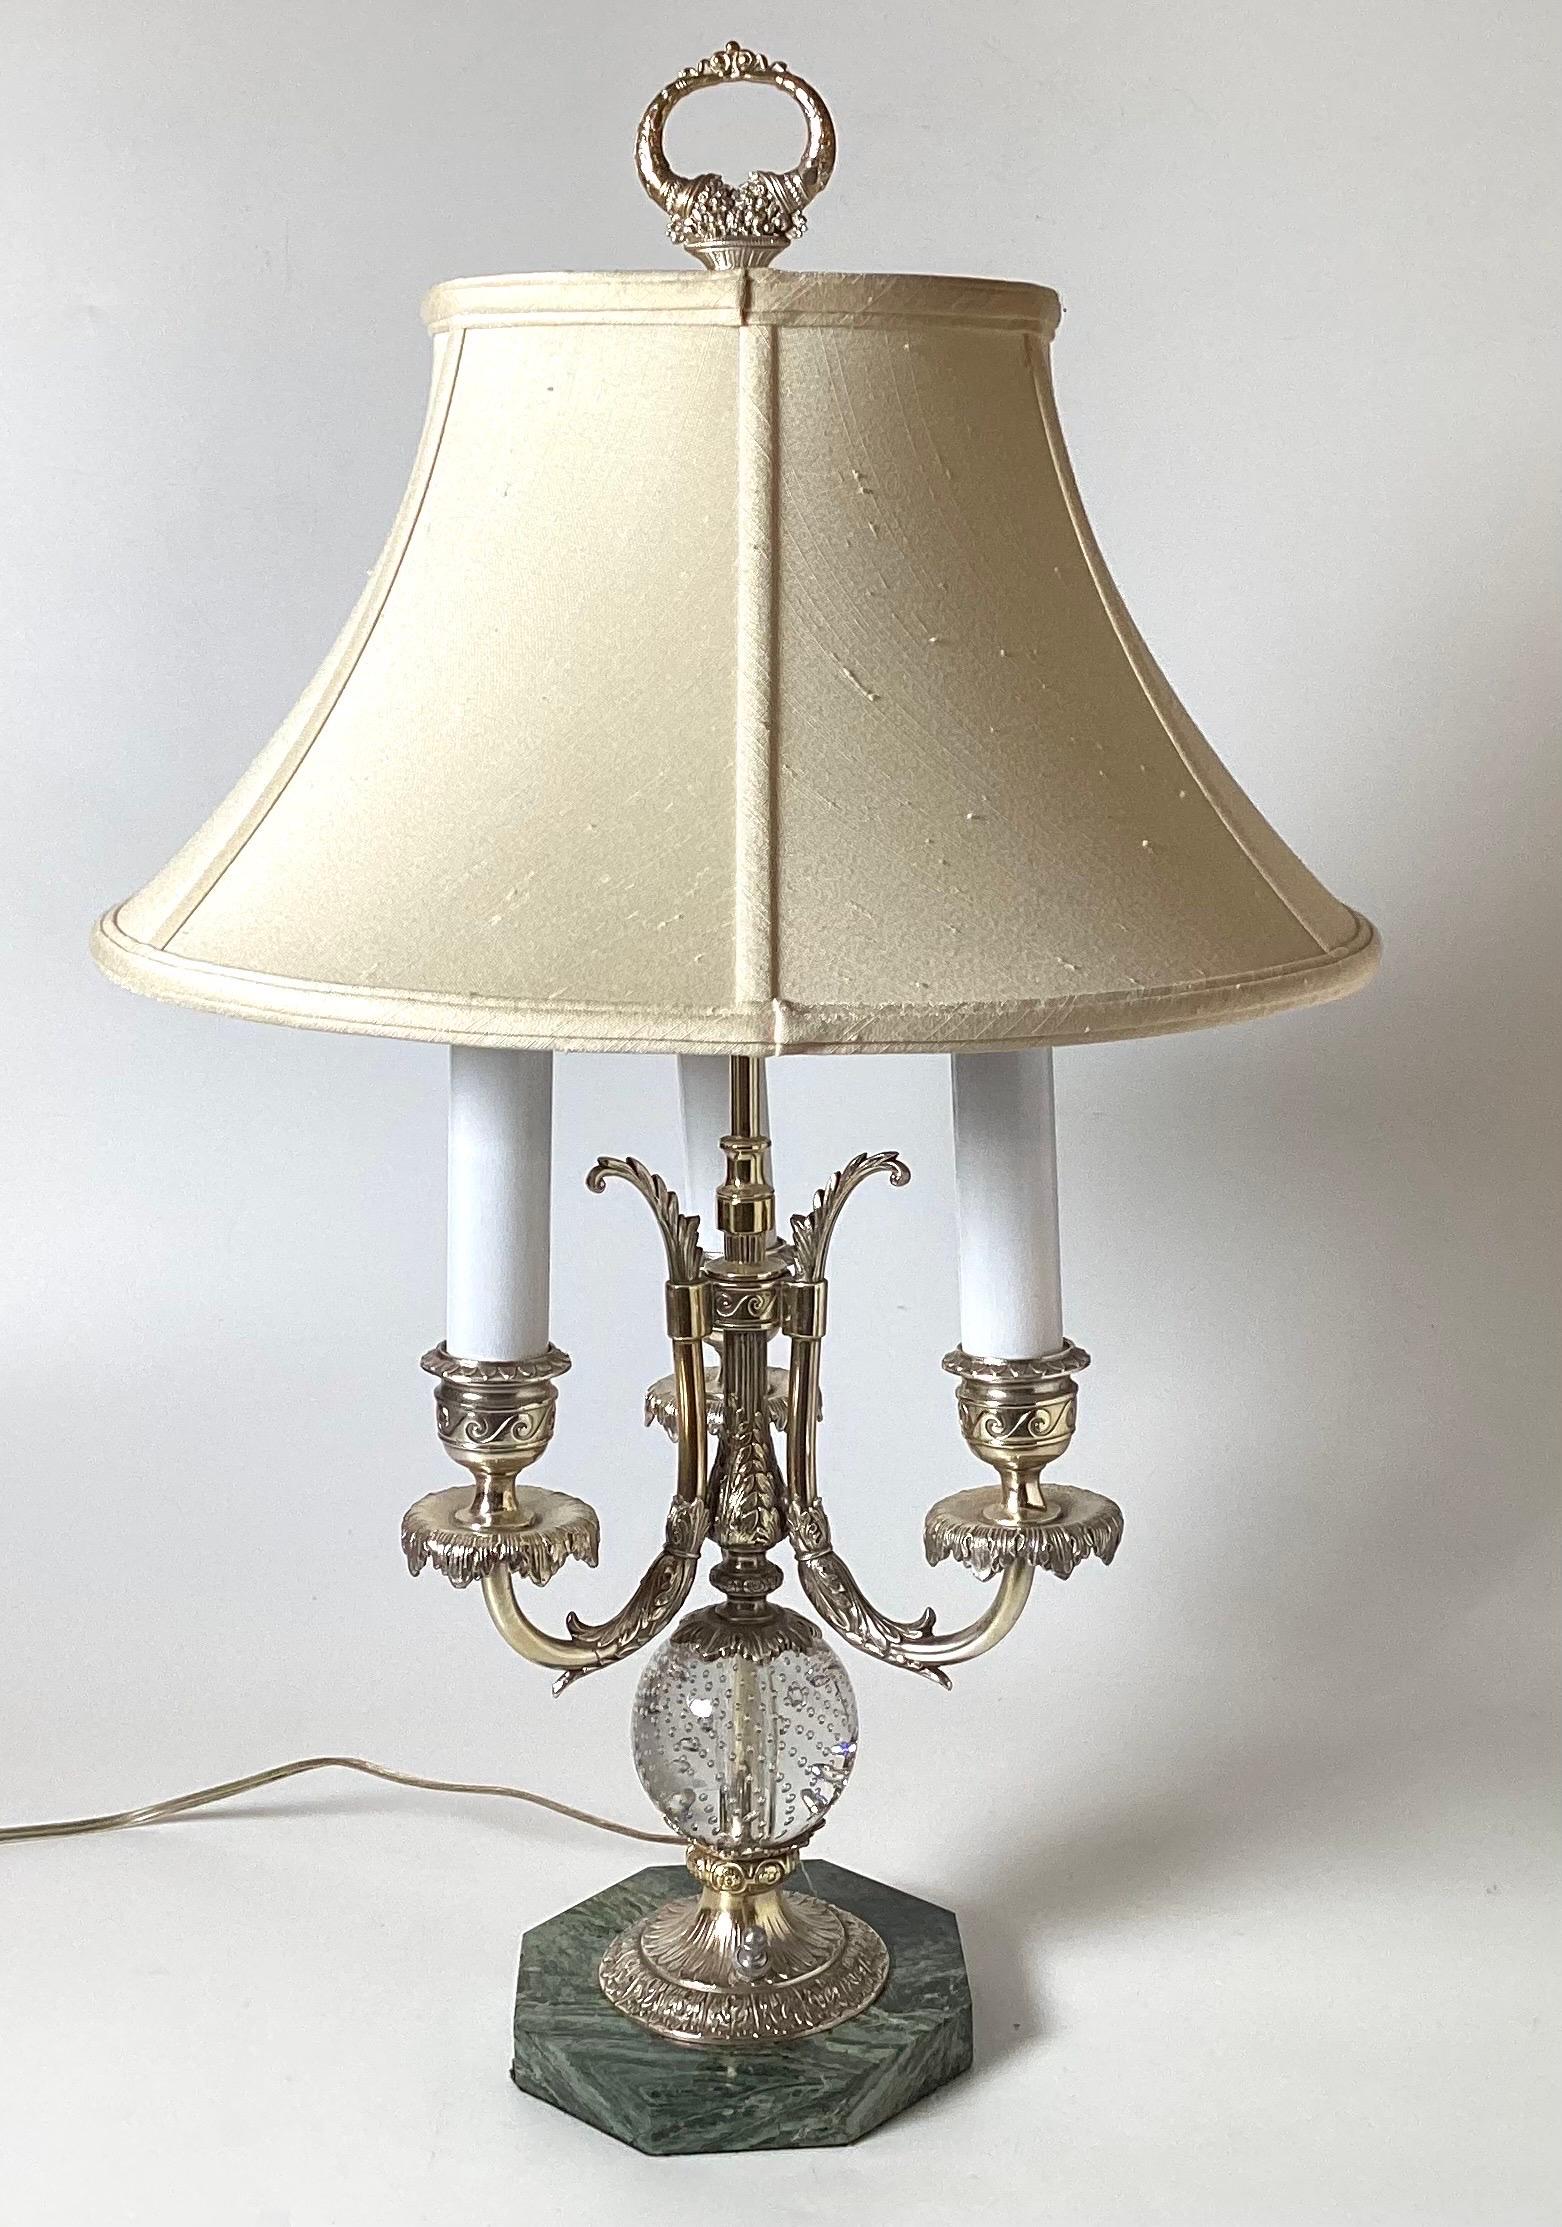 Edwardian Pairpoint Silvered Bronze Three Arm Table Lamp W/ Marble Base Early 20th century For Sale